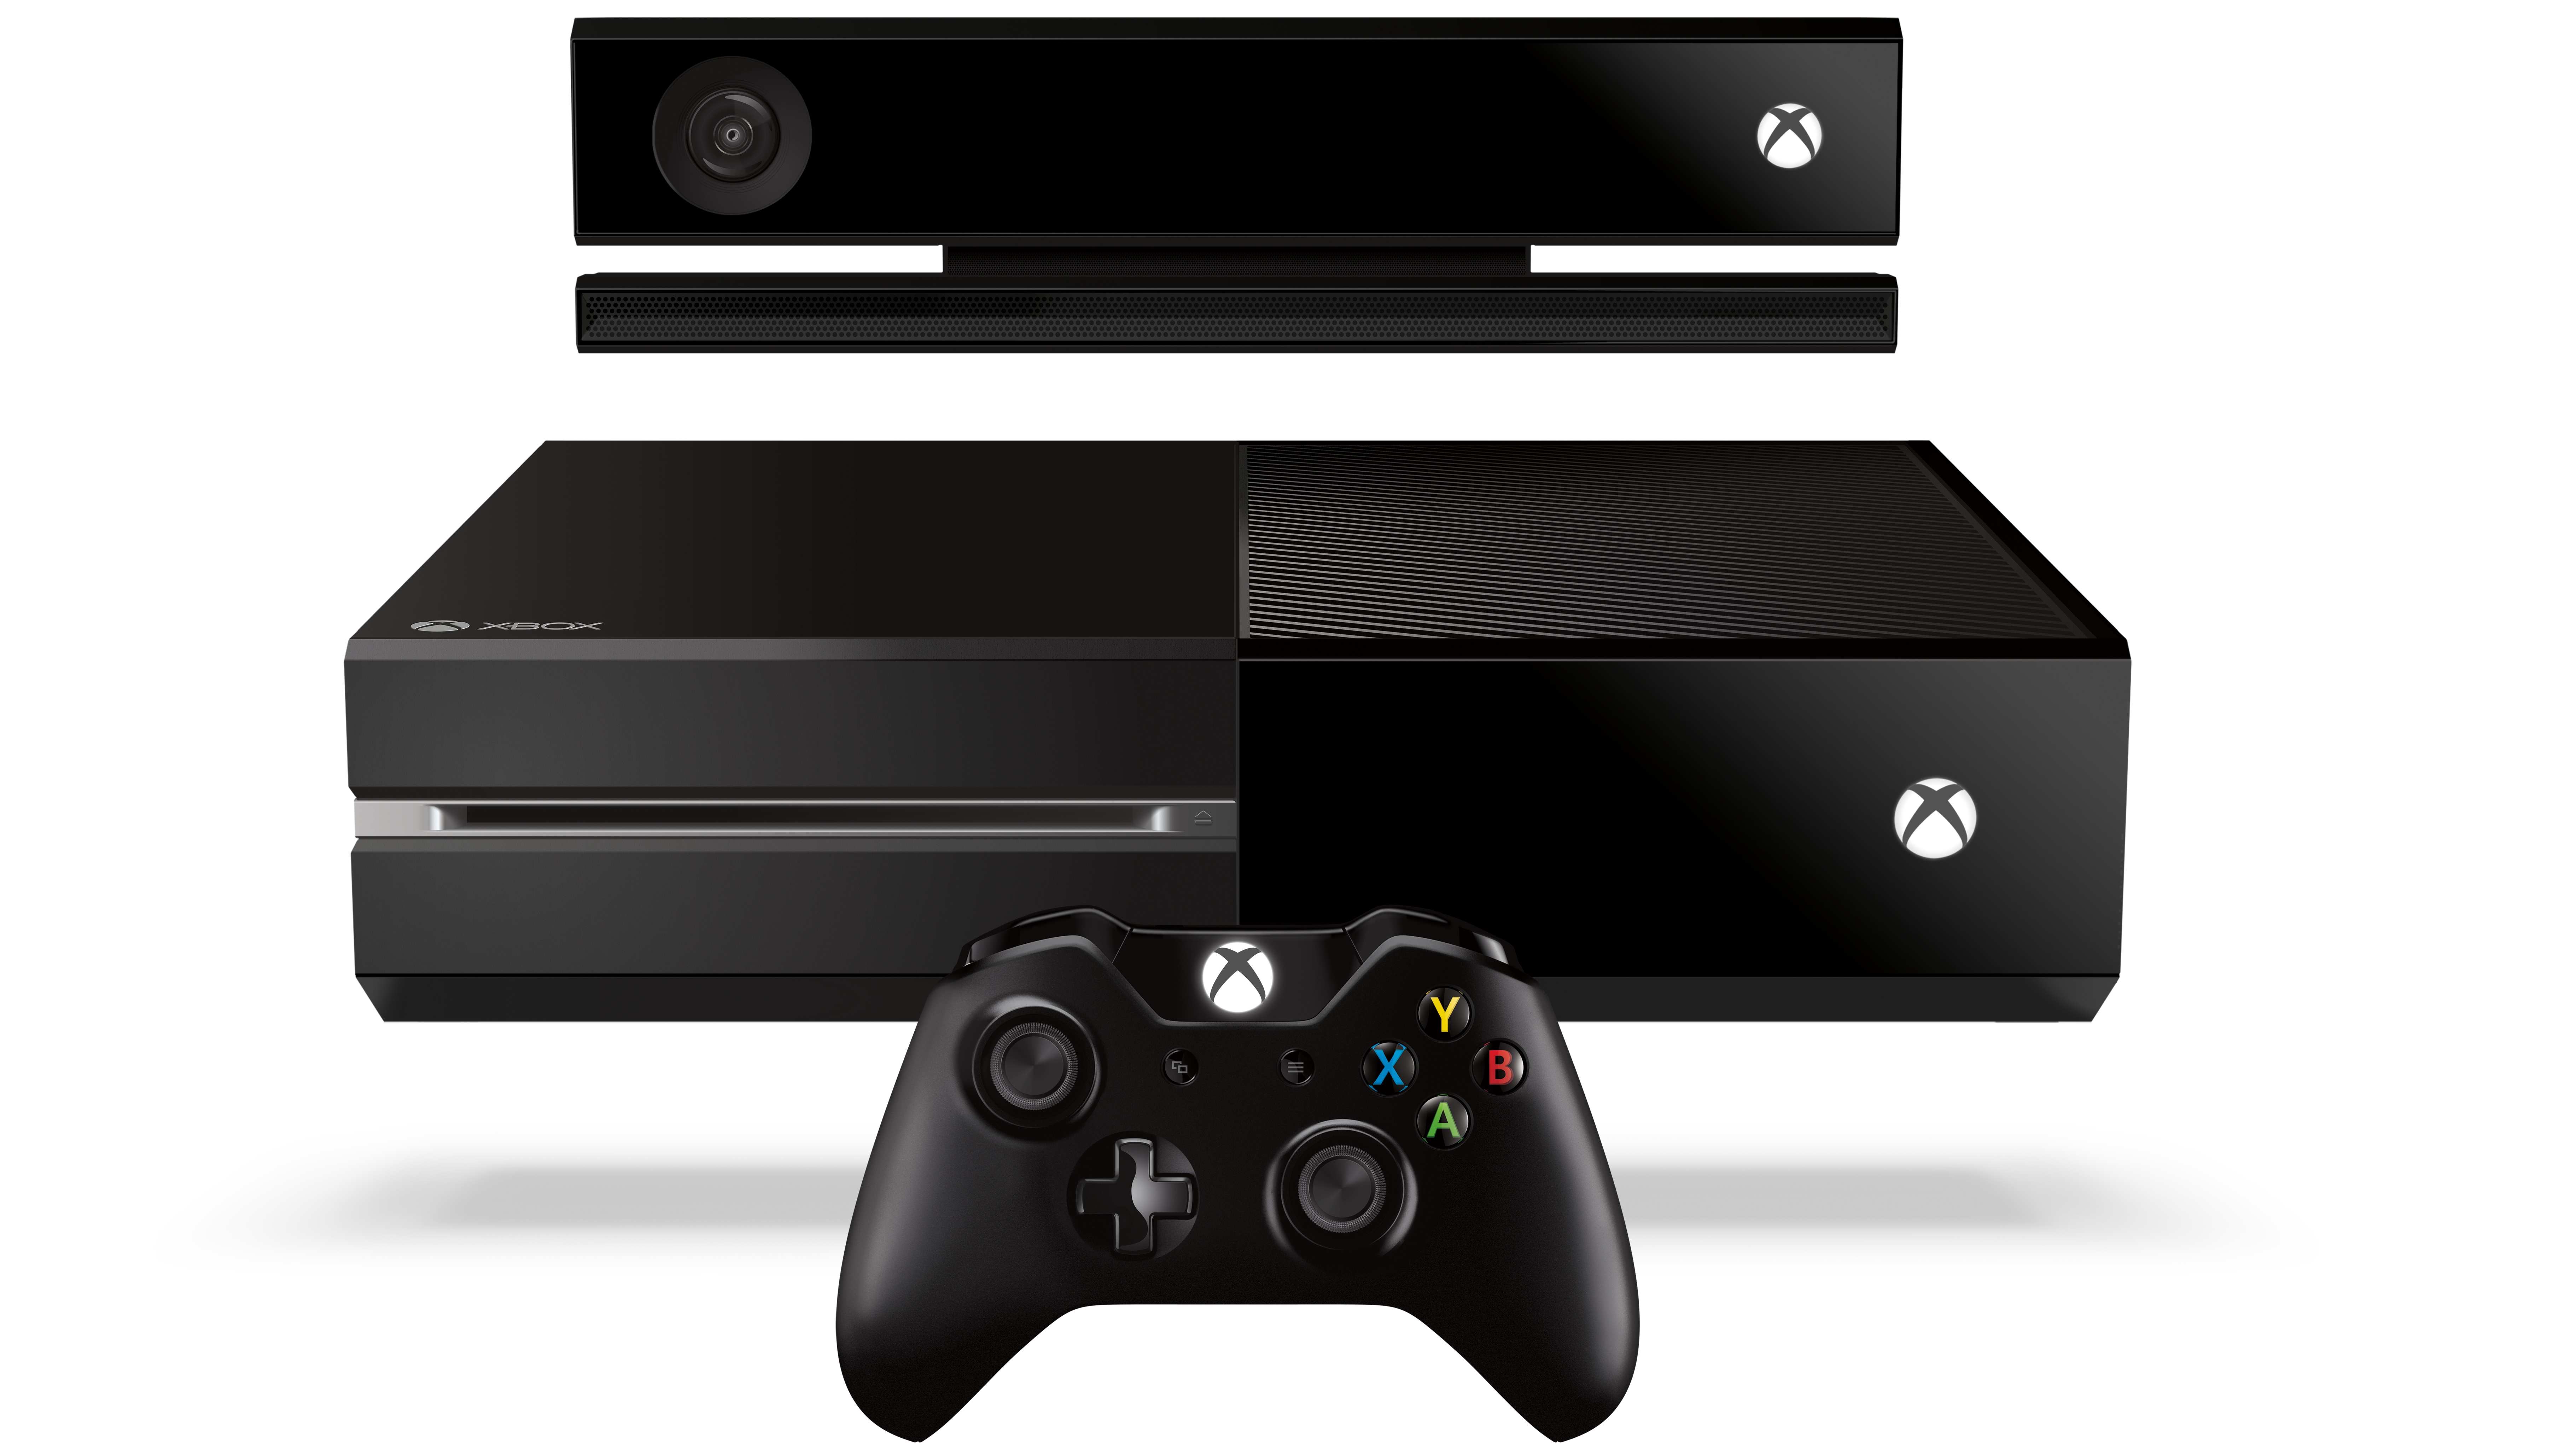 Microsoft: Yes, you CAN plug a PS4 into the Xbox One, but please don't